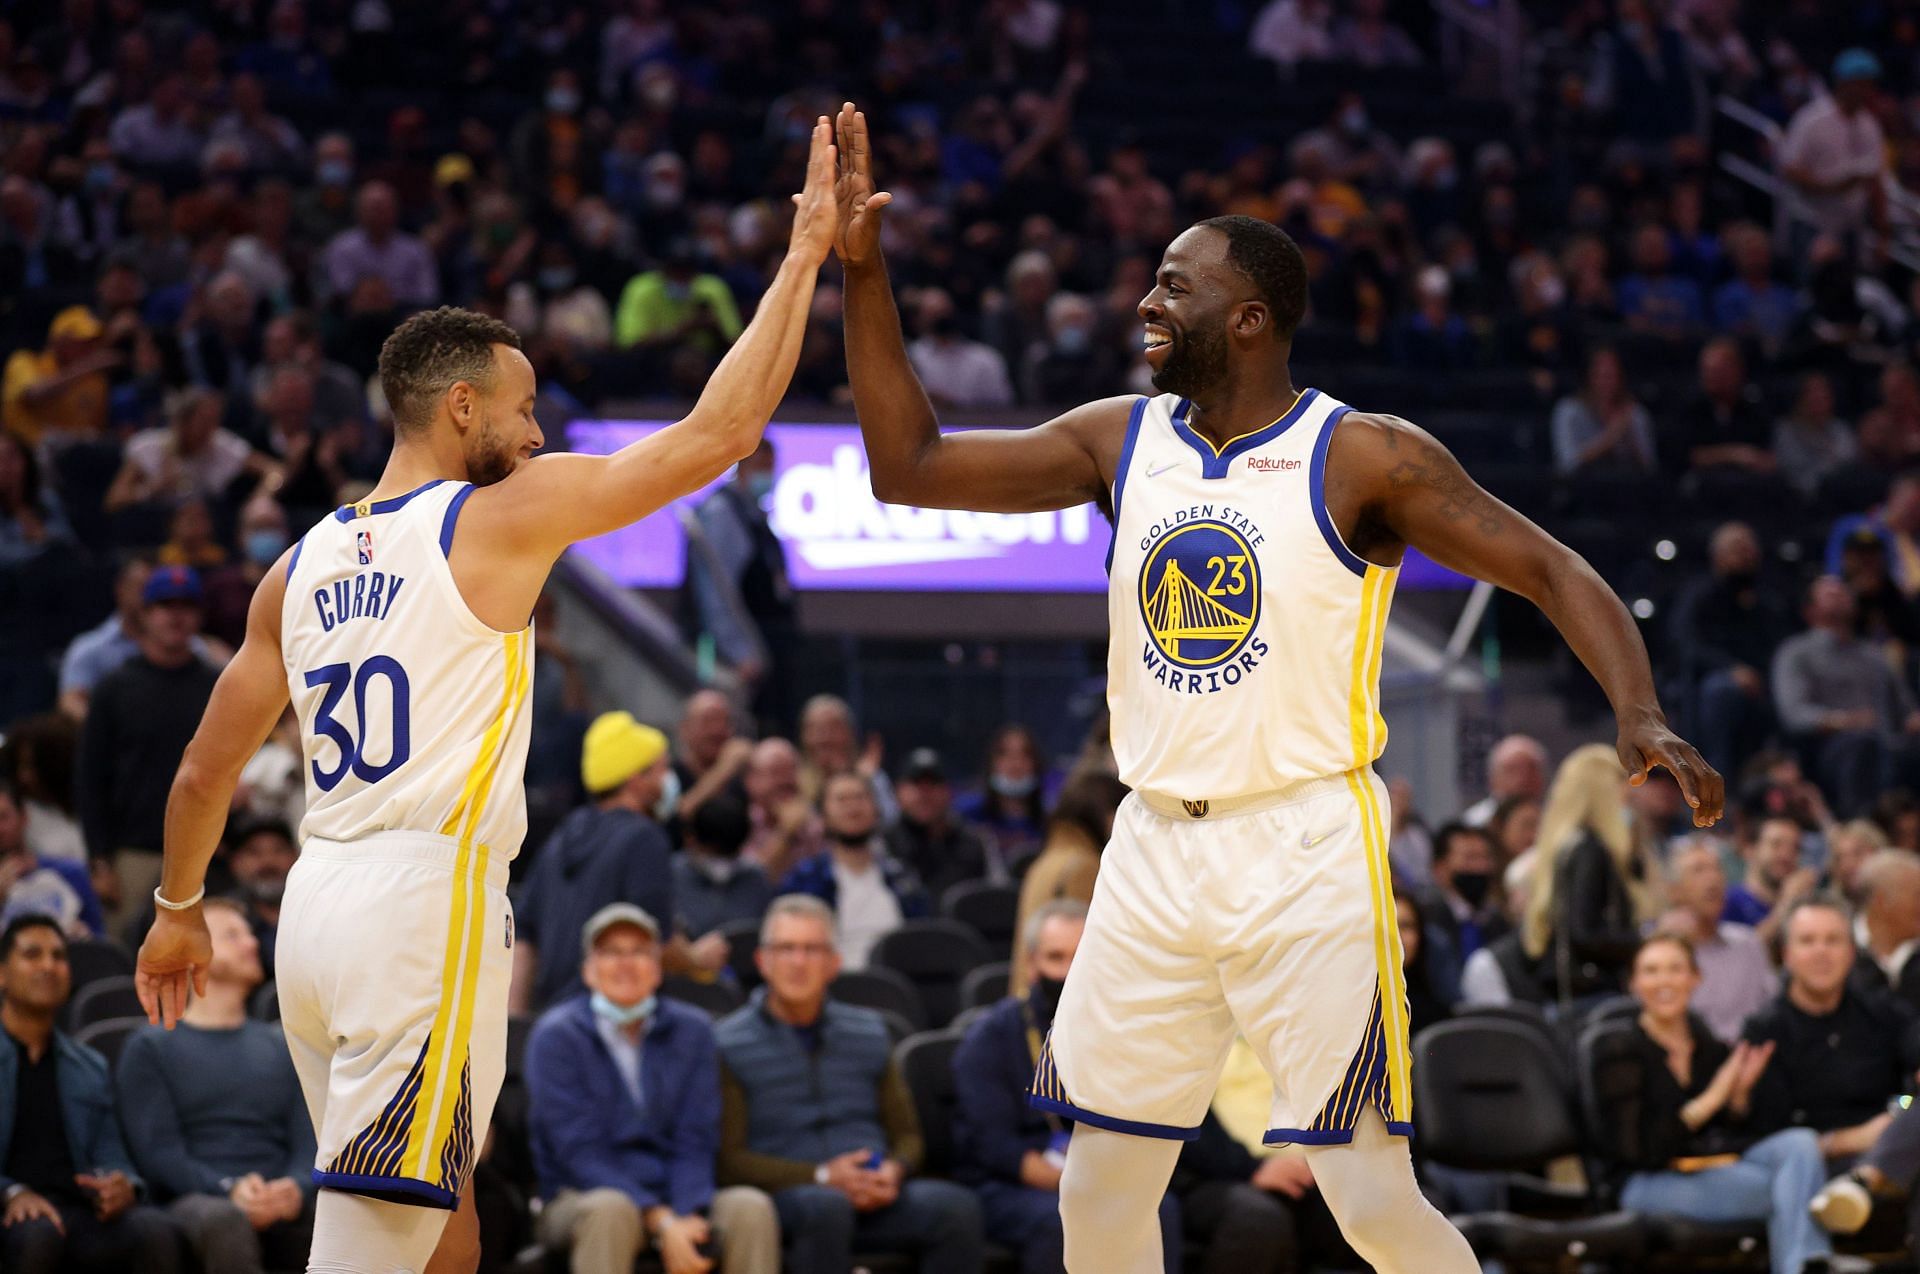 Draymond Green #23 of the Golden State Warriors high-fives Stephen Curry #30